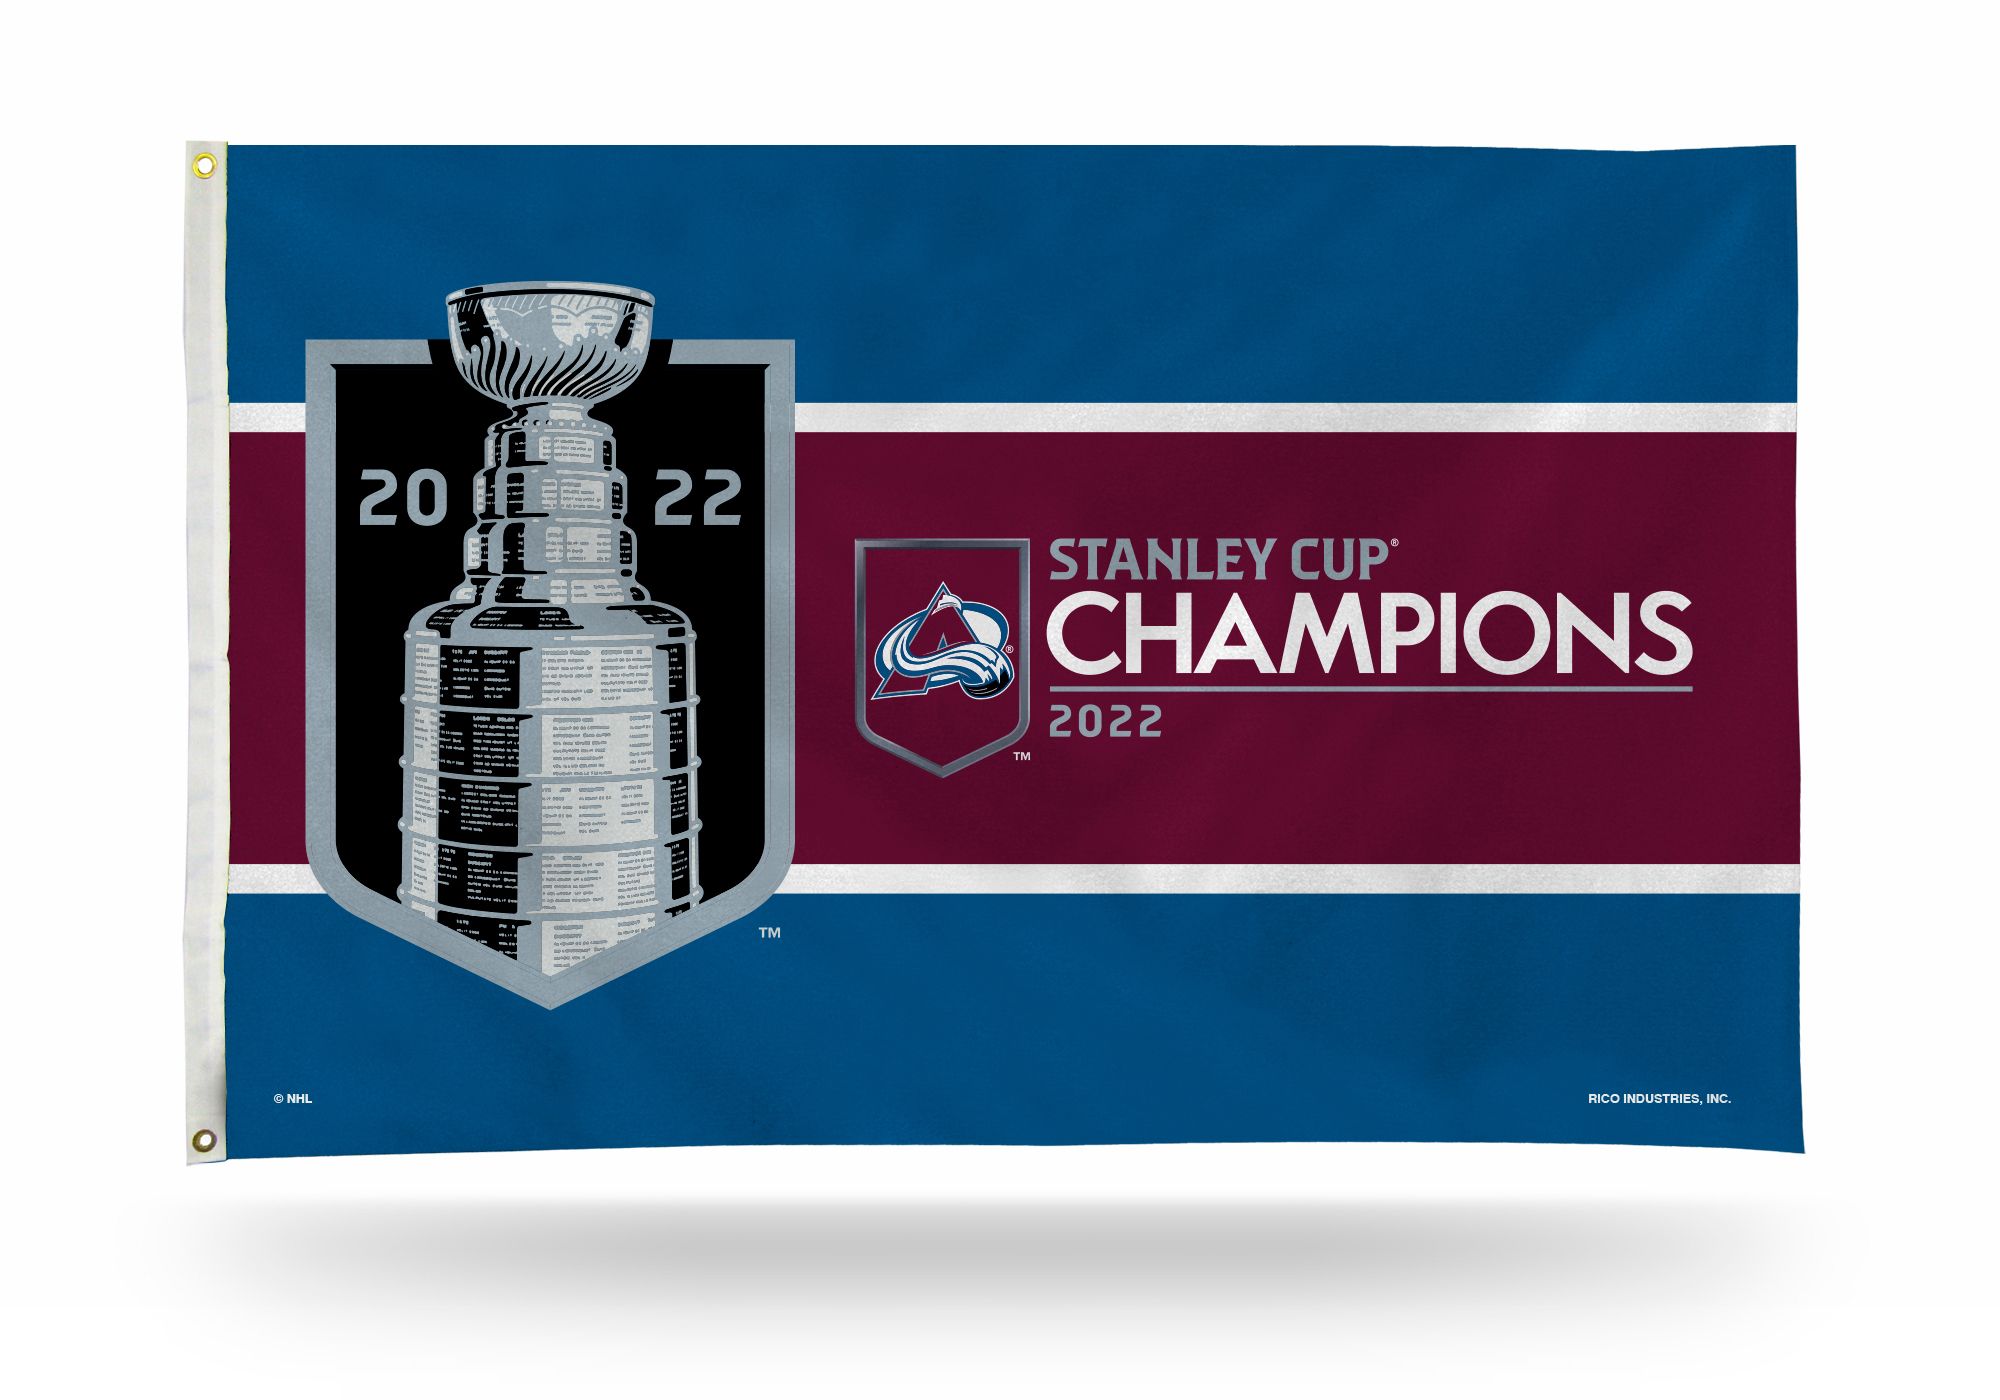 Colorado Avalanche Champions NHL 2022 Stanley Cup